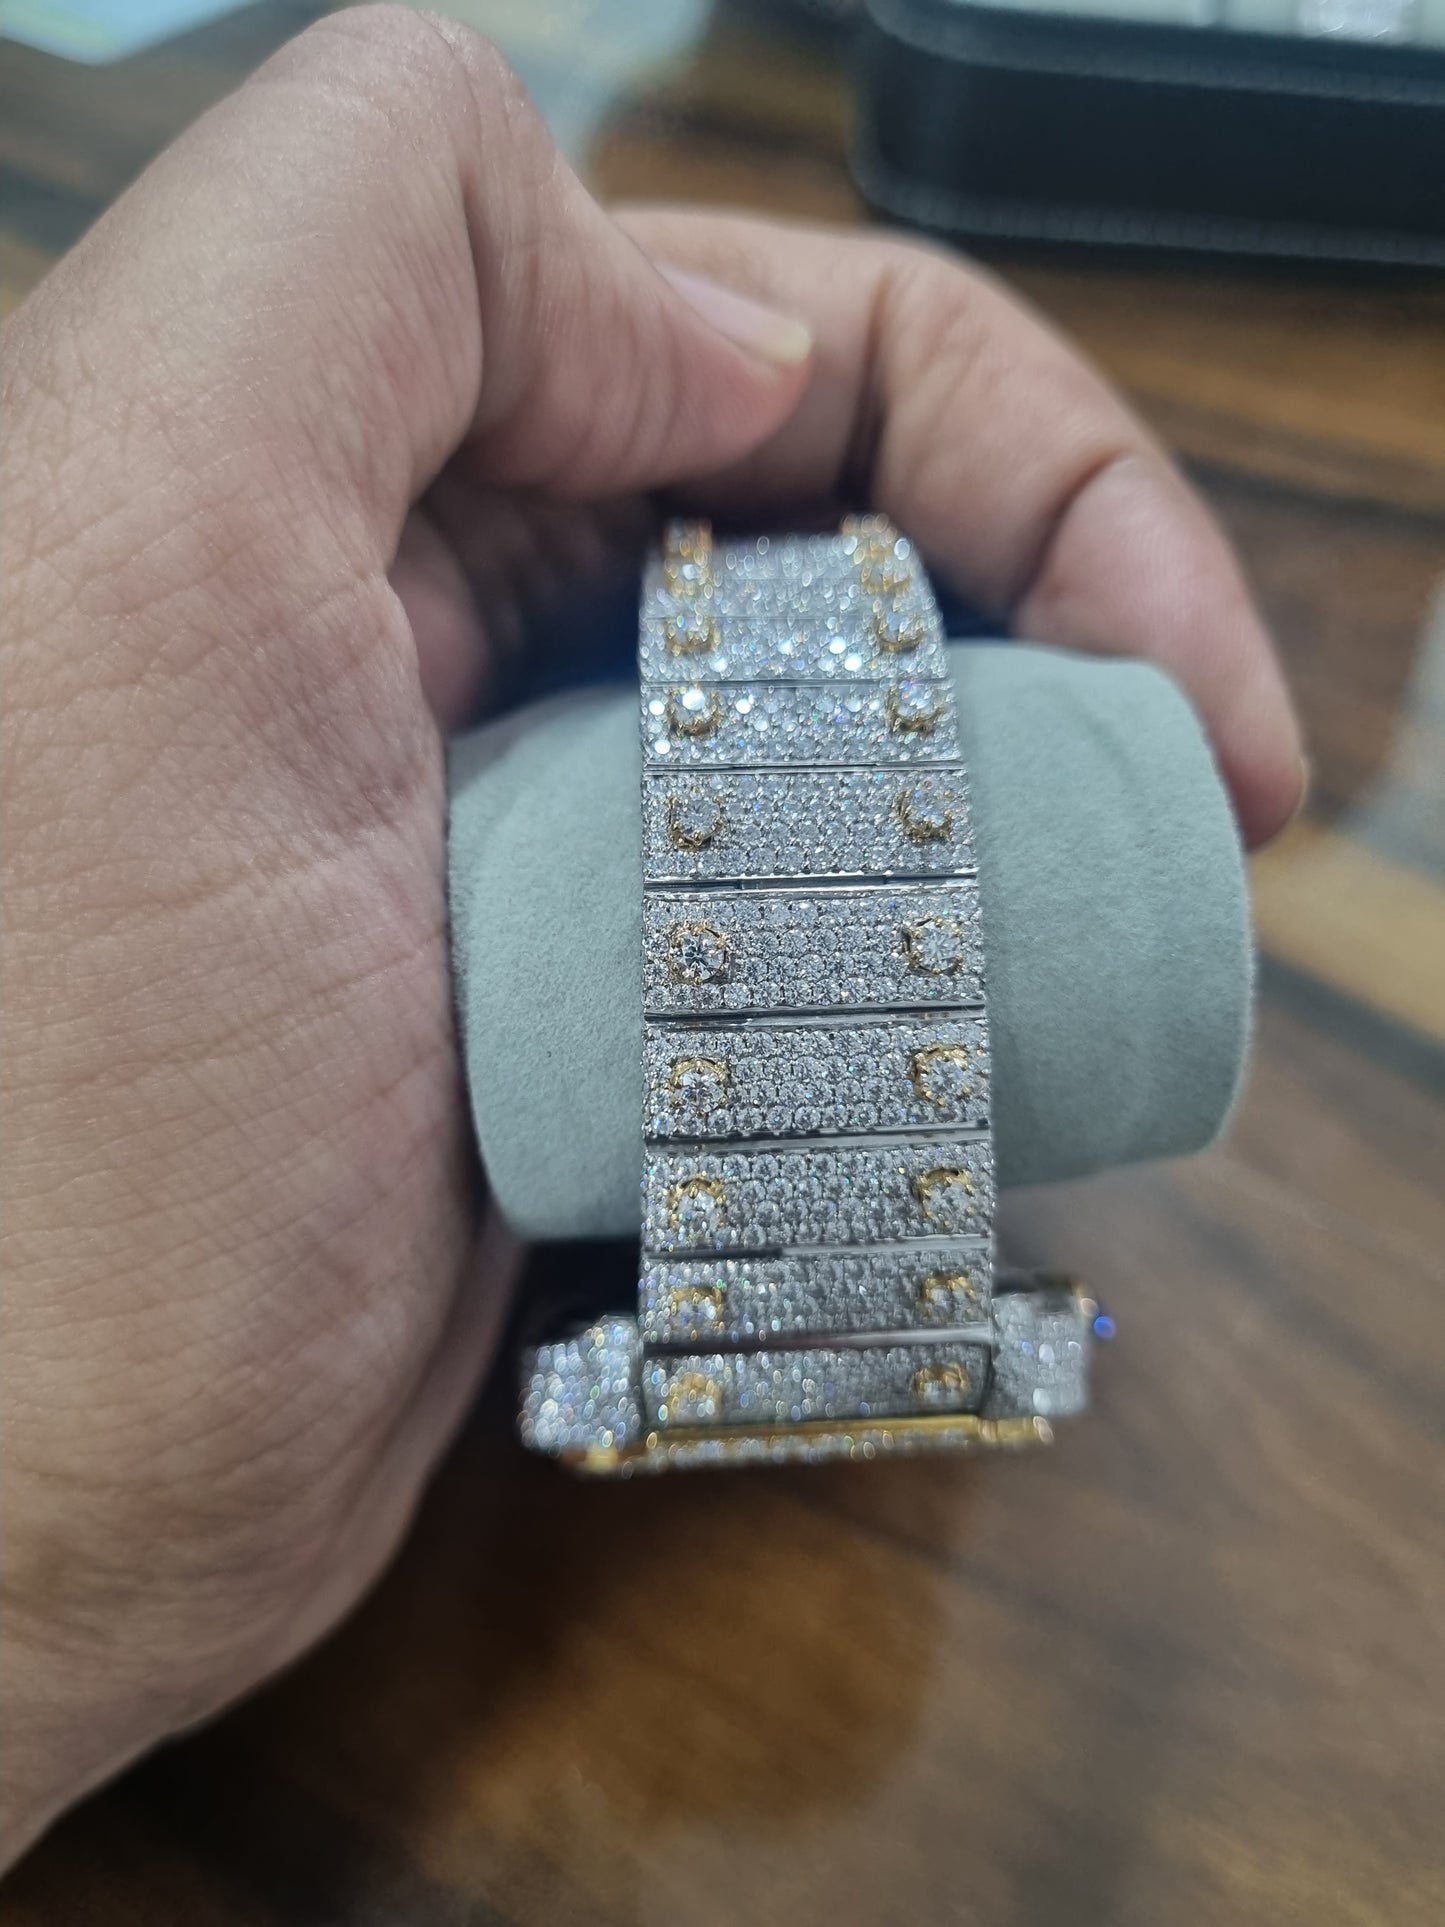 Moissanite Diamond Studed Fully Iced out Golden Watch